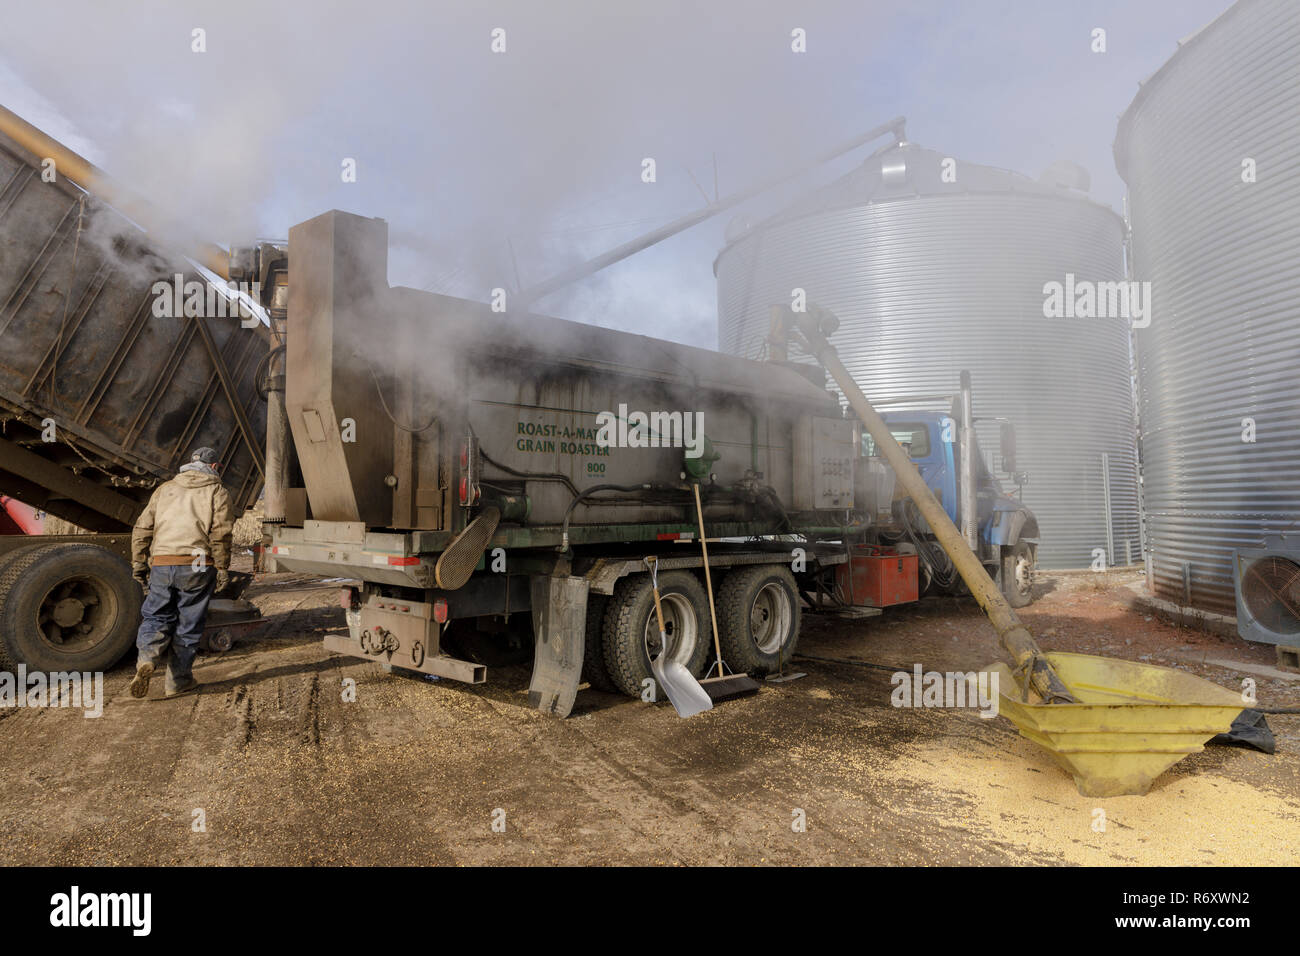 Roasting soy beans at the site of the grain bins, town of Minden, Mohawk Valley, New York, USA Stock Photo